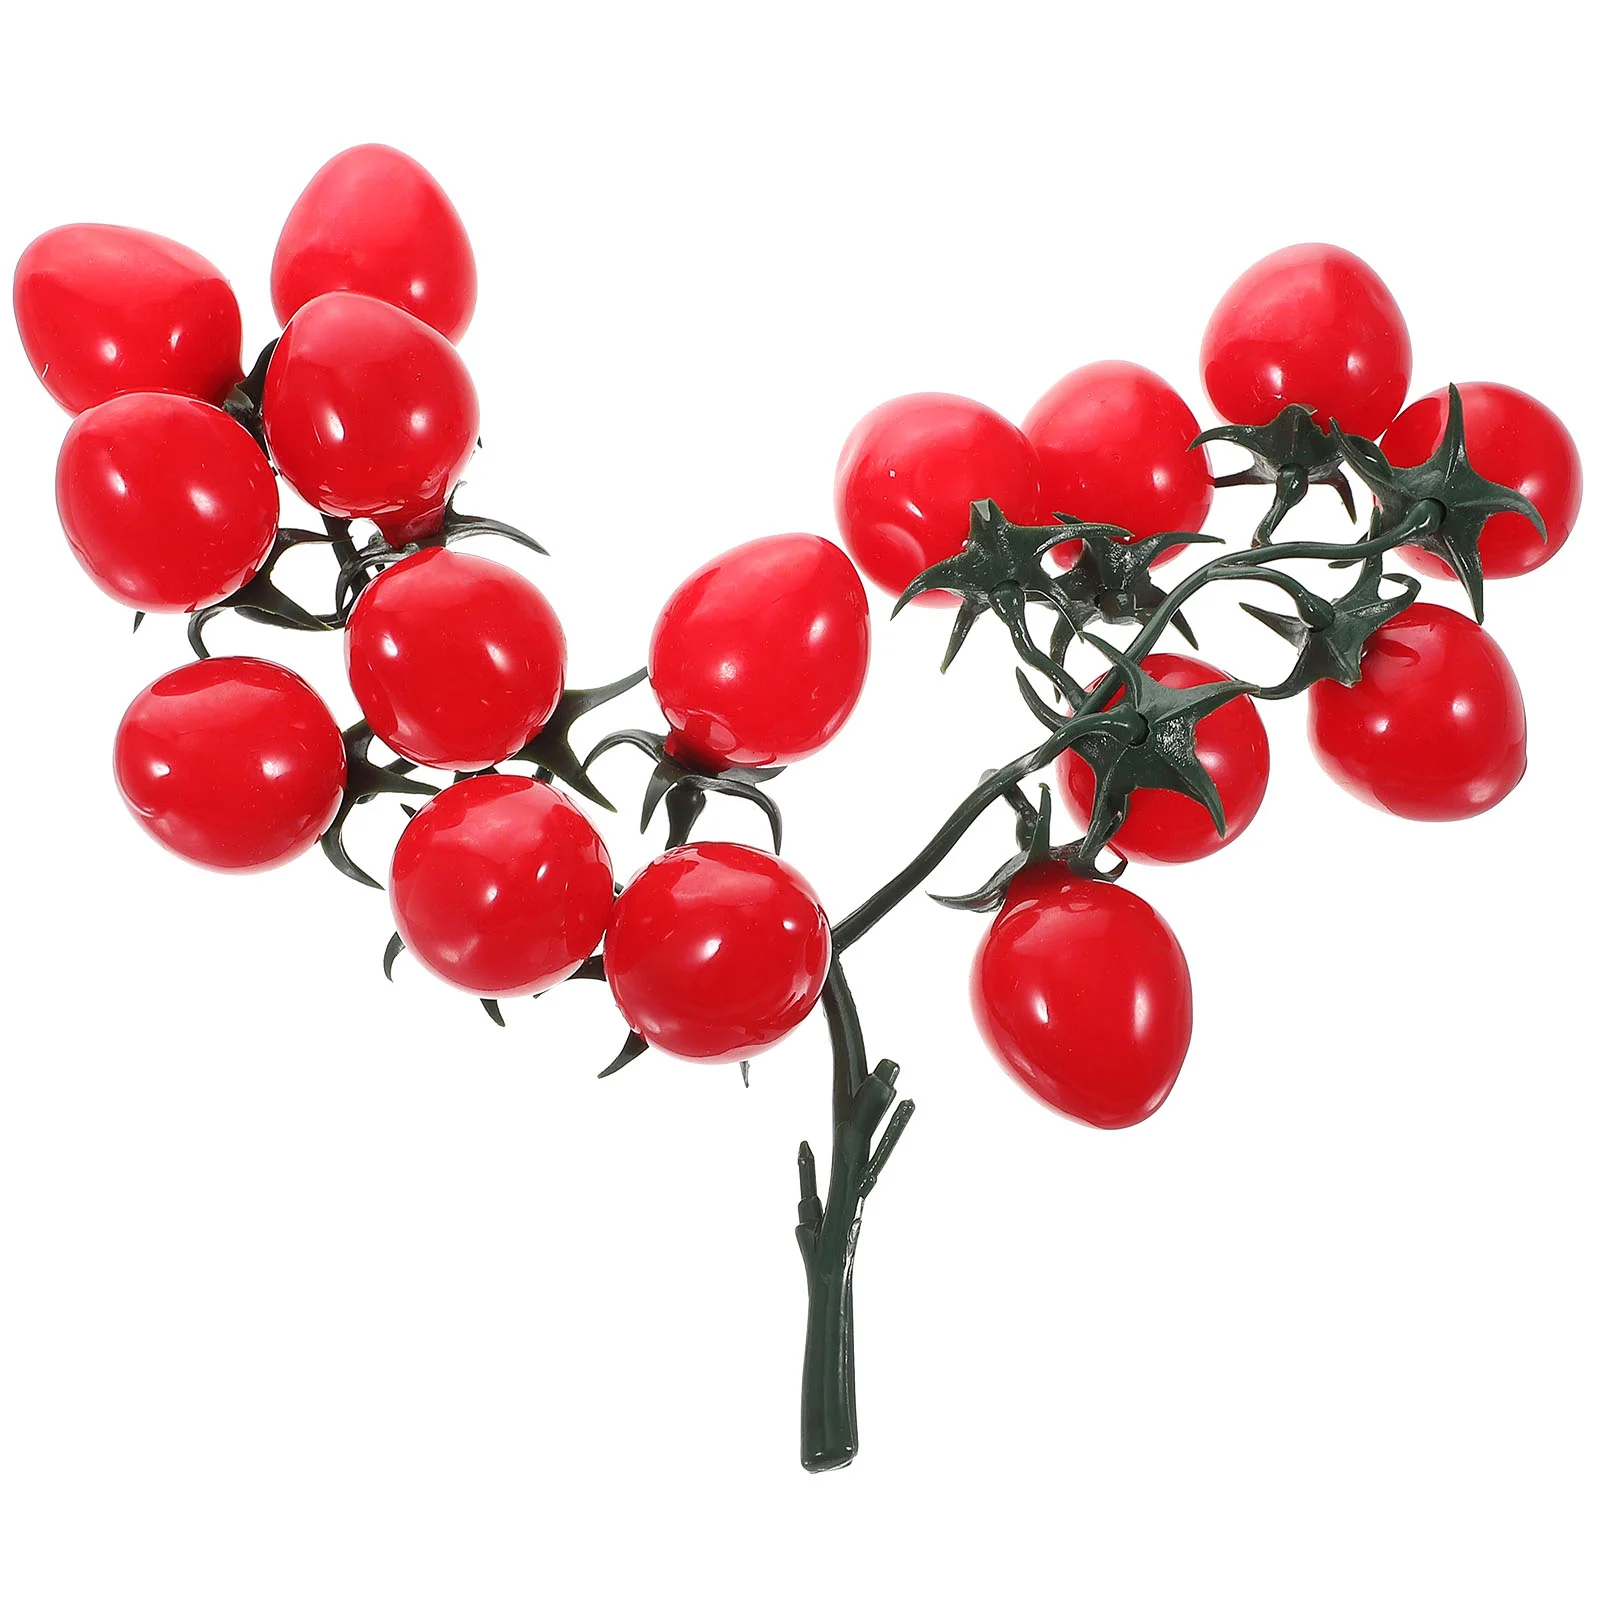 

Cherry Tomatoes Home Fruit Ornament Realistic Plastic Photography Props Artificial Fruits Decors